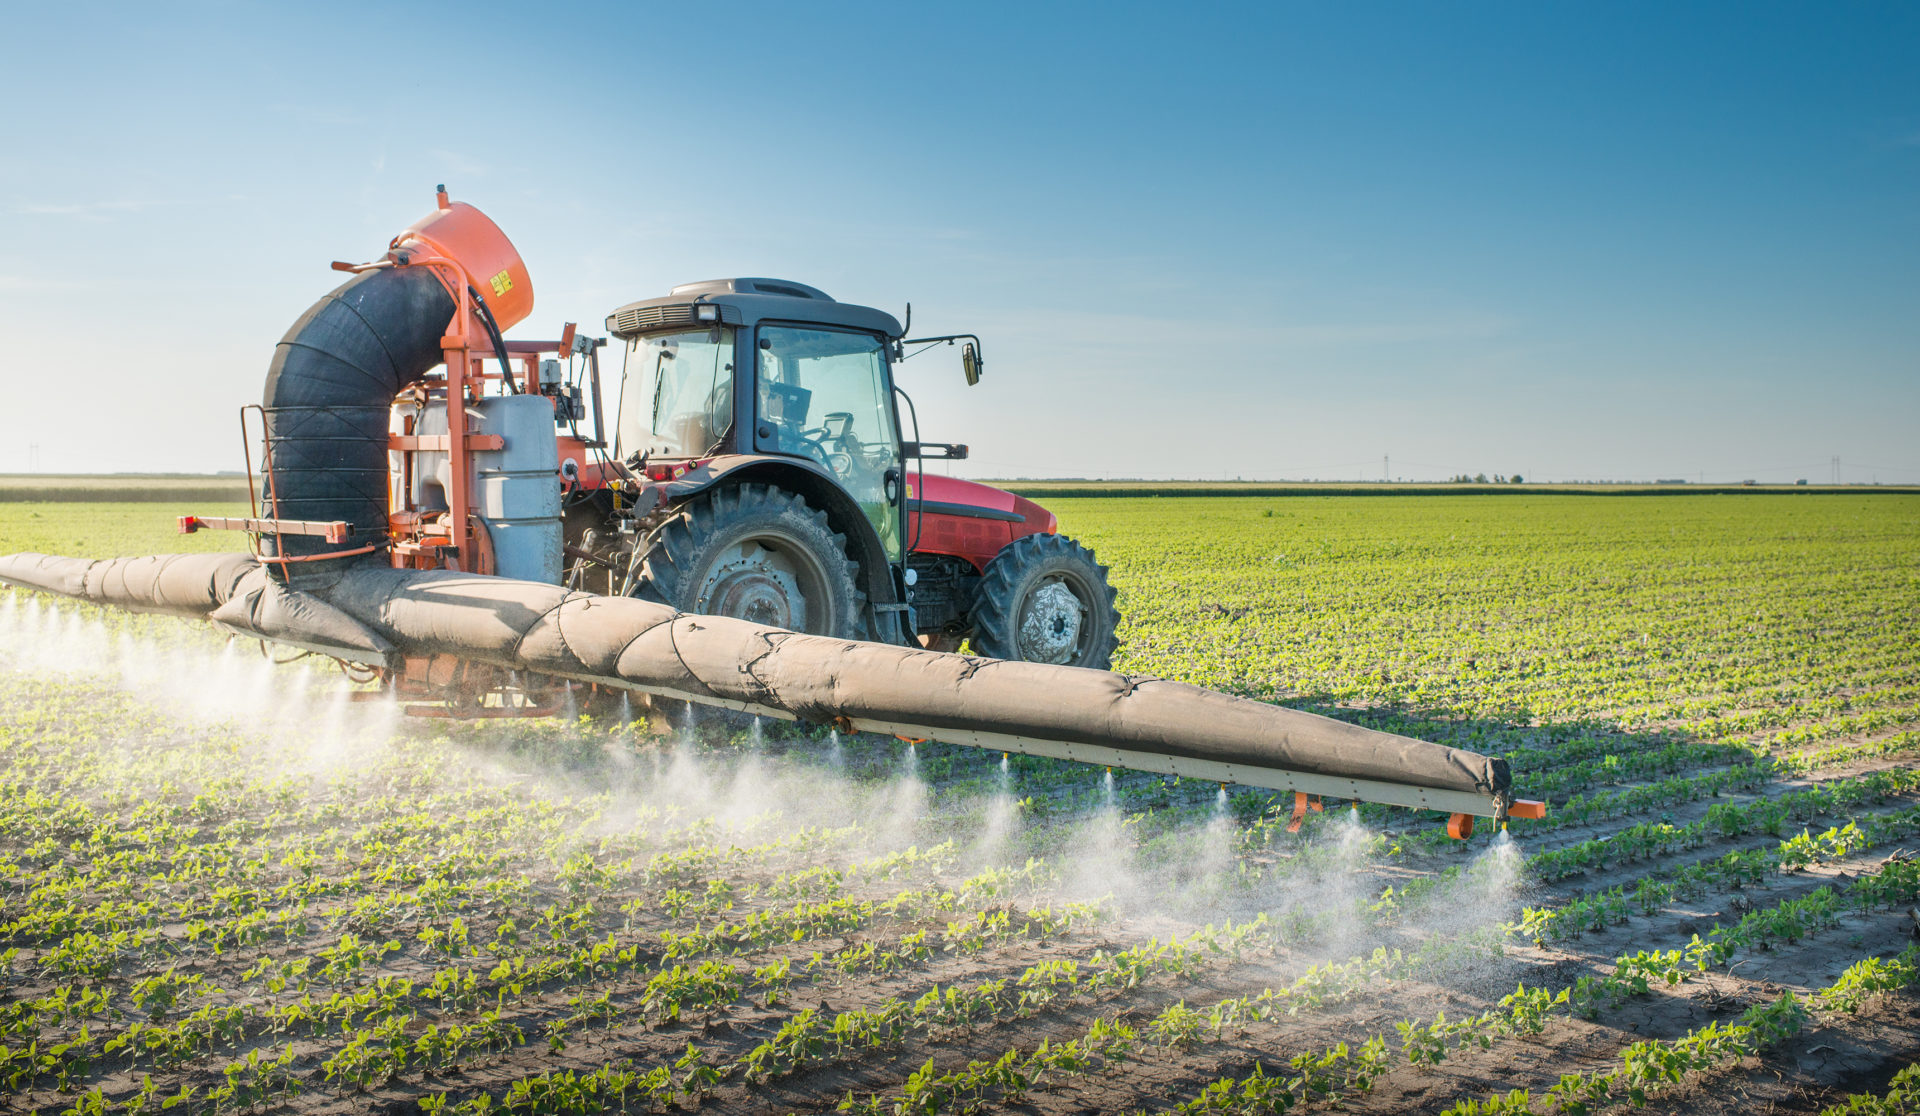 The EU’s Plan To Halve Pesticide Use Is Ambitious, But Realistic